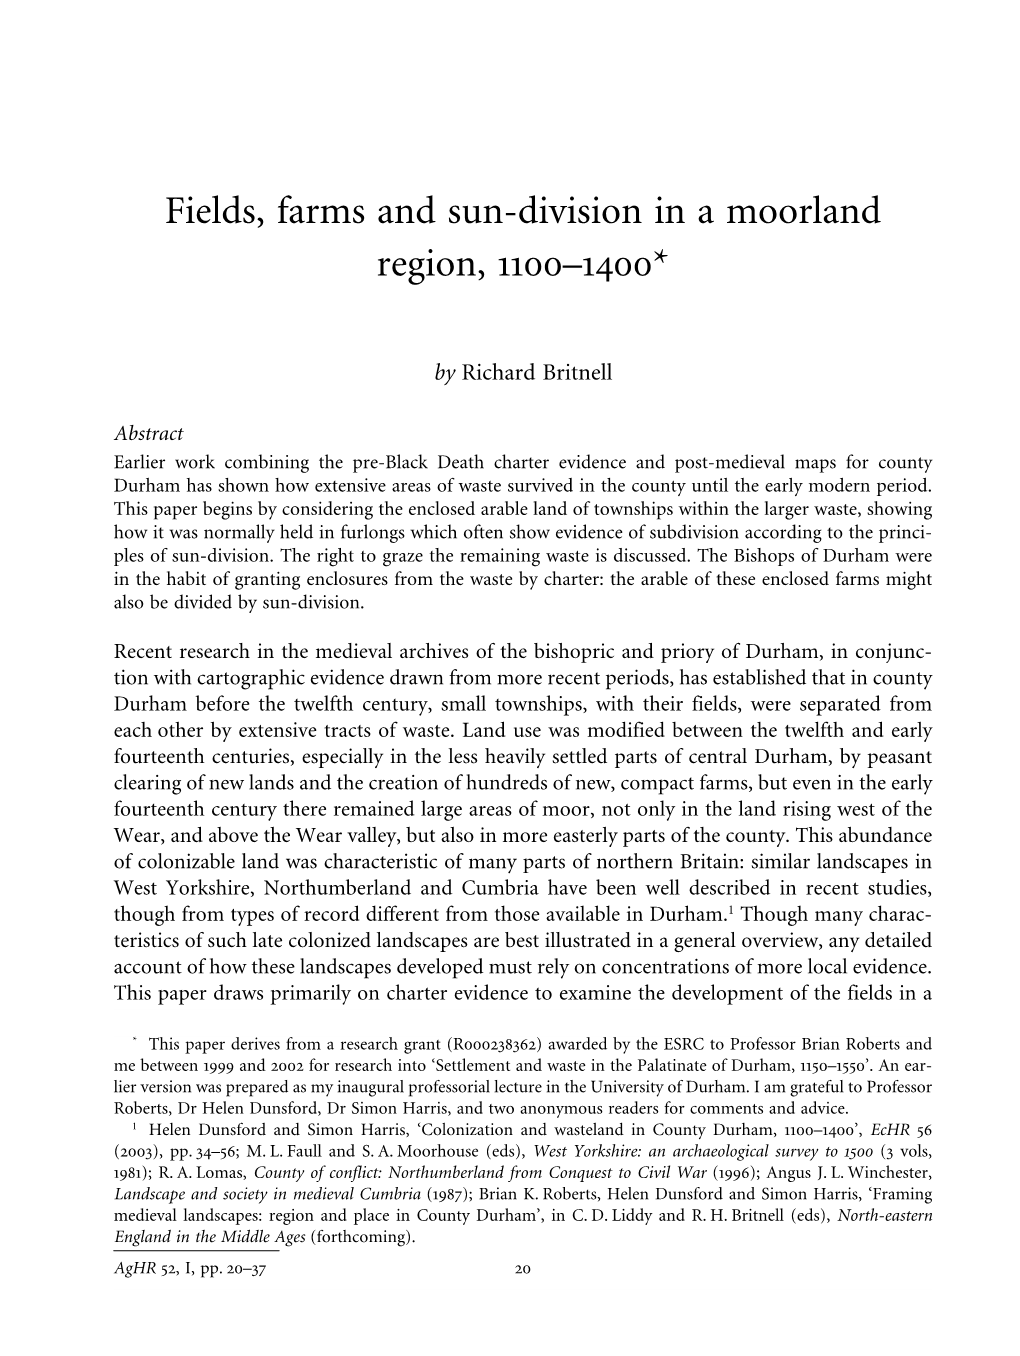 Fields, Farms and Sun-Division in a Moorland Region, 1100–1400*